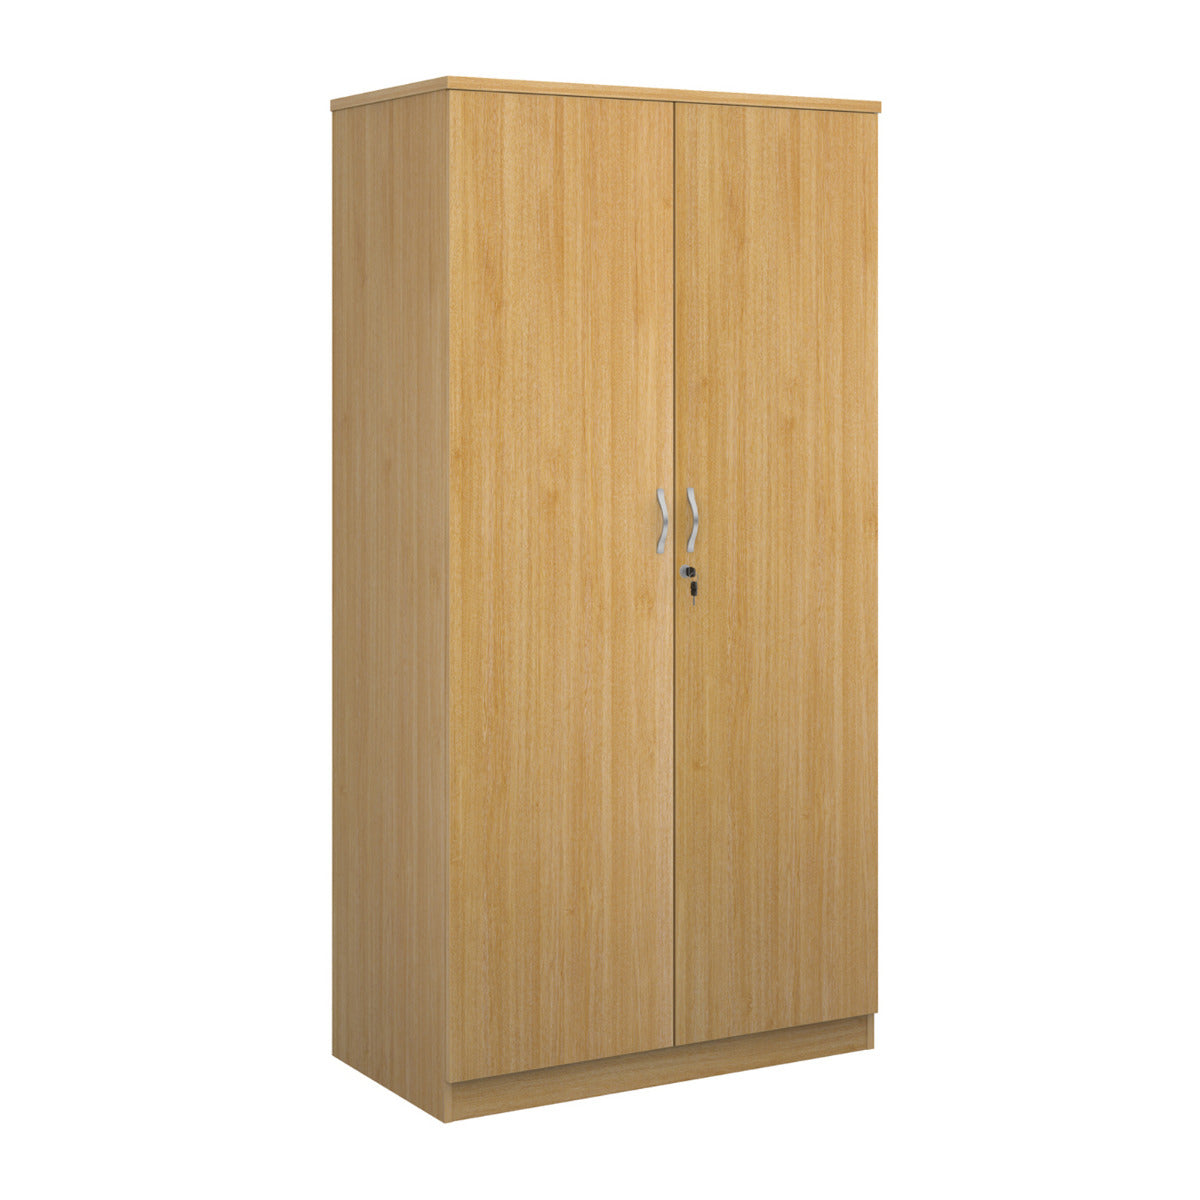 Deluxe One, Two, Three or Four Shelf 1020mm Wide Cupboard